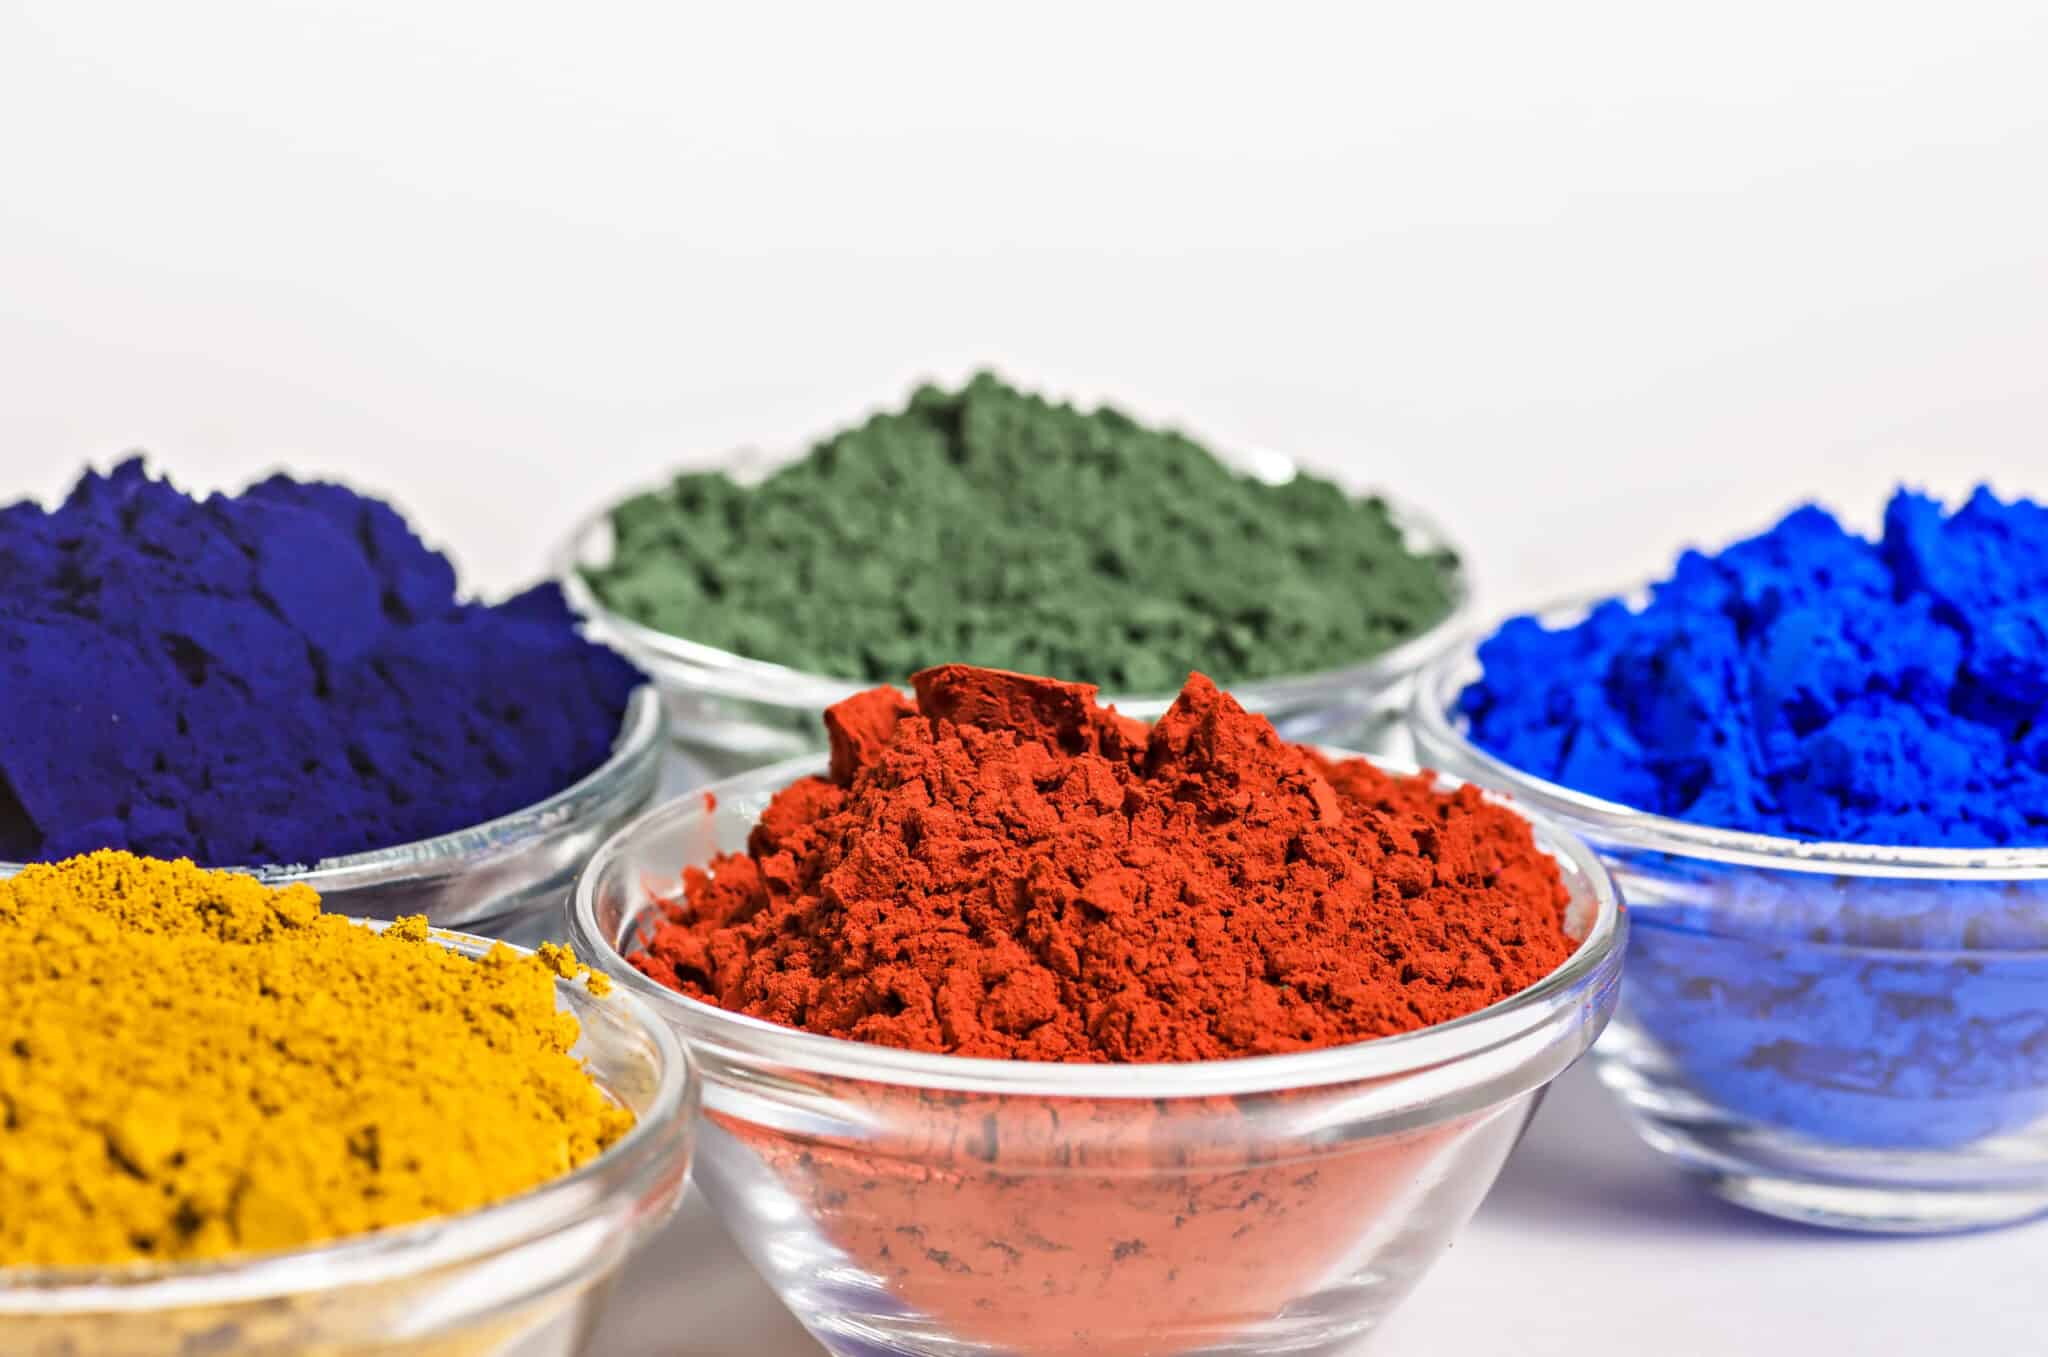 Epoxy Pigments and Colorants from EPODEX